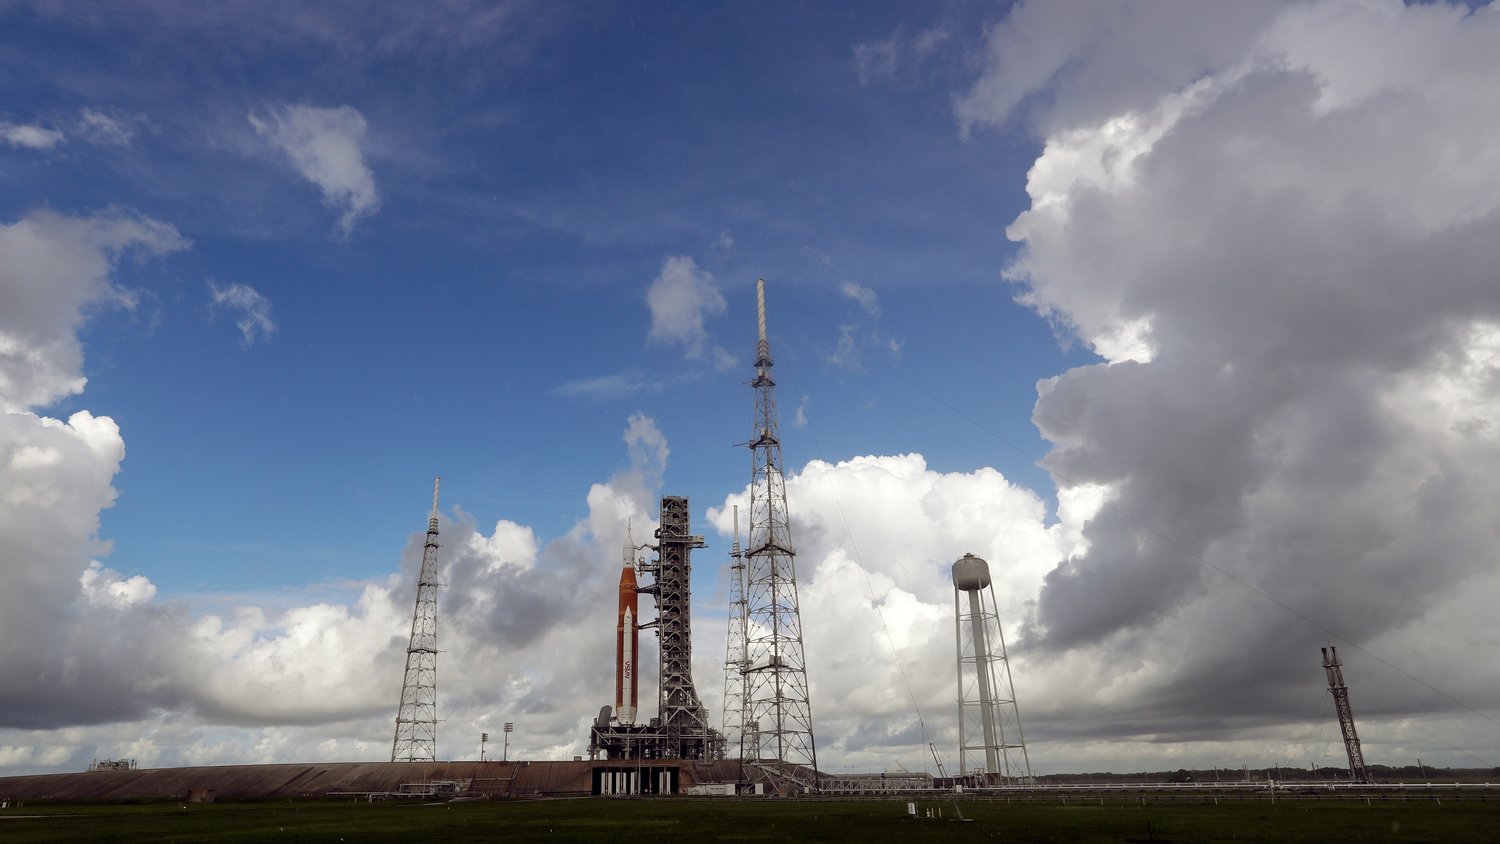 The NASA moon rocket stands ready less than 24 hours before it is scheduled to launch on Pad 39B for the Artemis 1 mission to orbit the moon at the Kennedy Space Center, Sunday, Aug. 28, 2022, in Cape Canaveral, Fla.